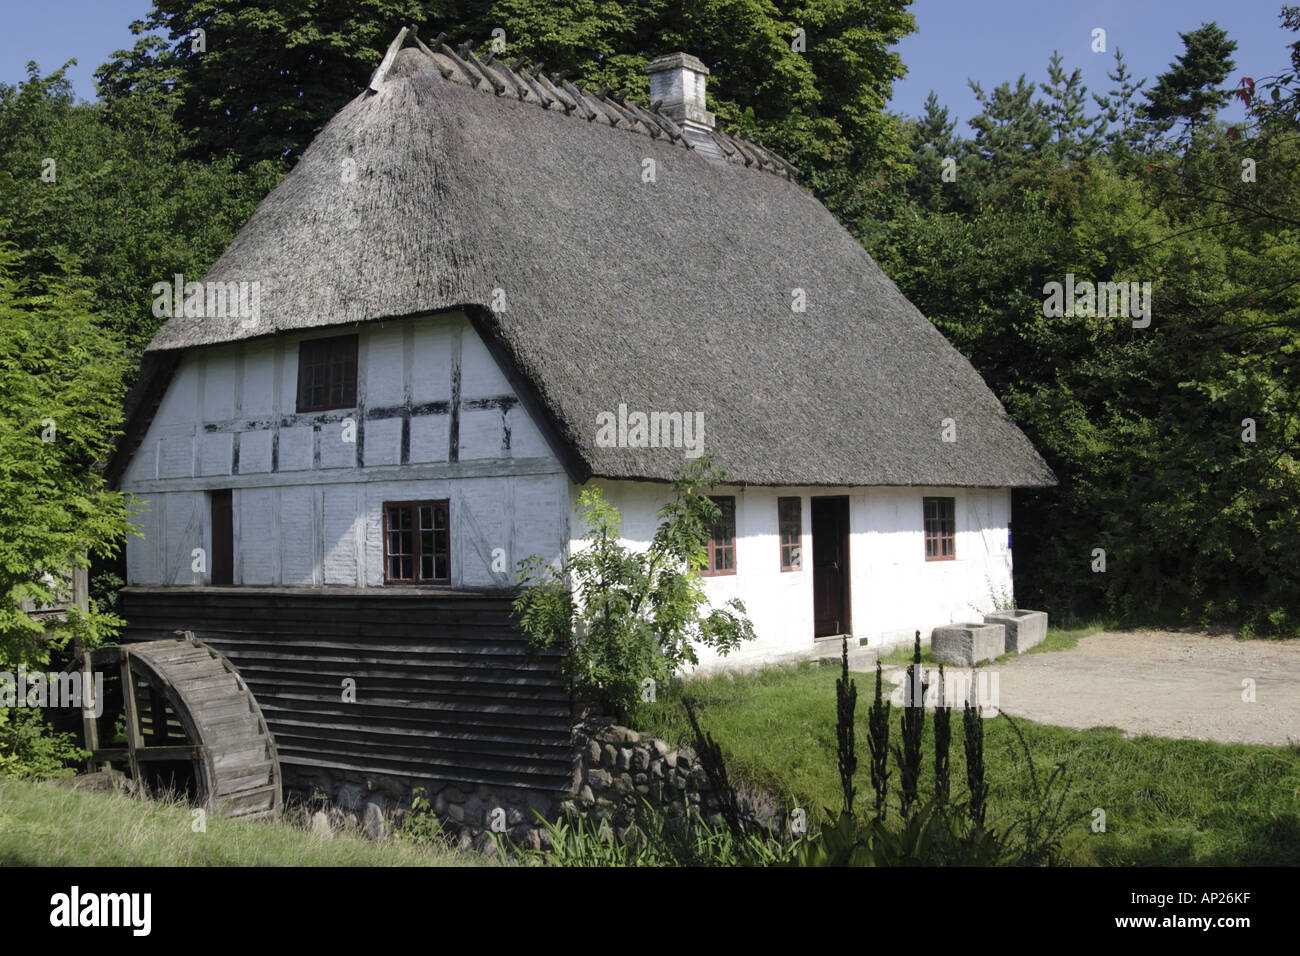 Thatched cottage withwater wheel at the Old Town Museum Den Gamle By, Arhus Denmark Stock Photo